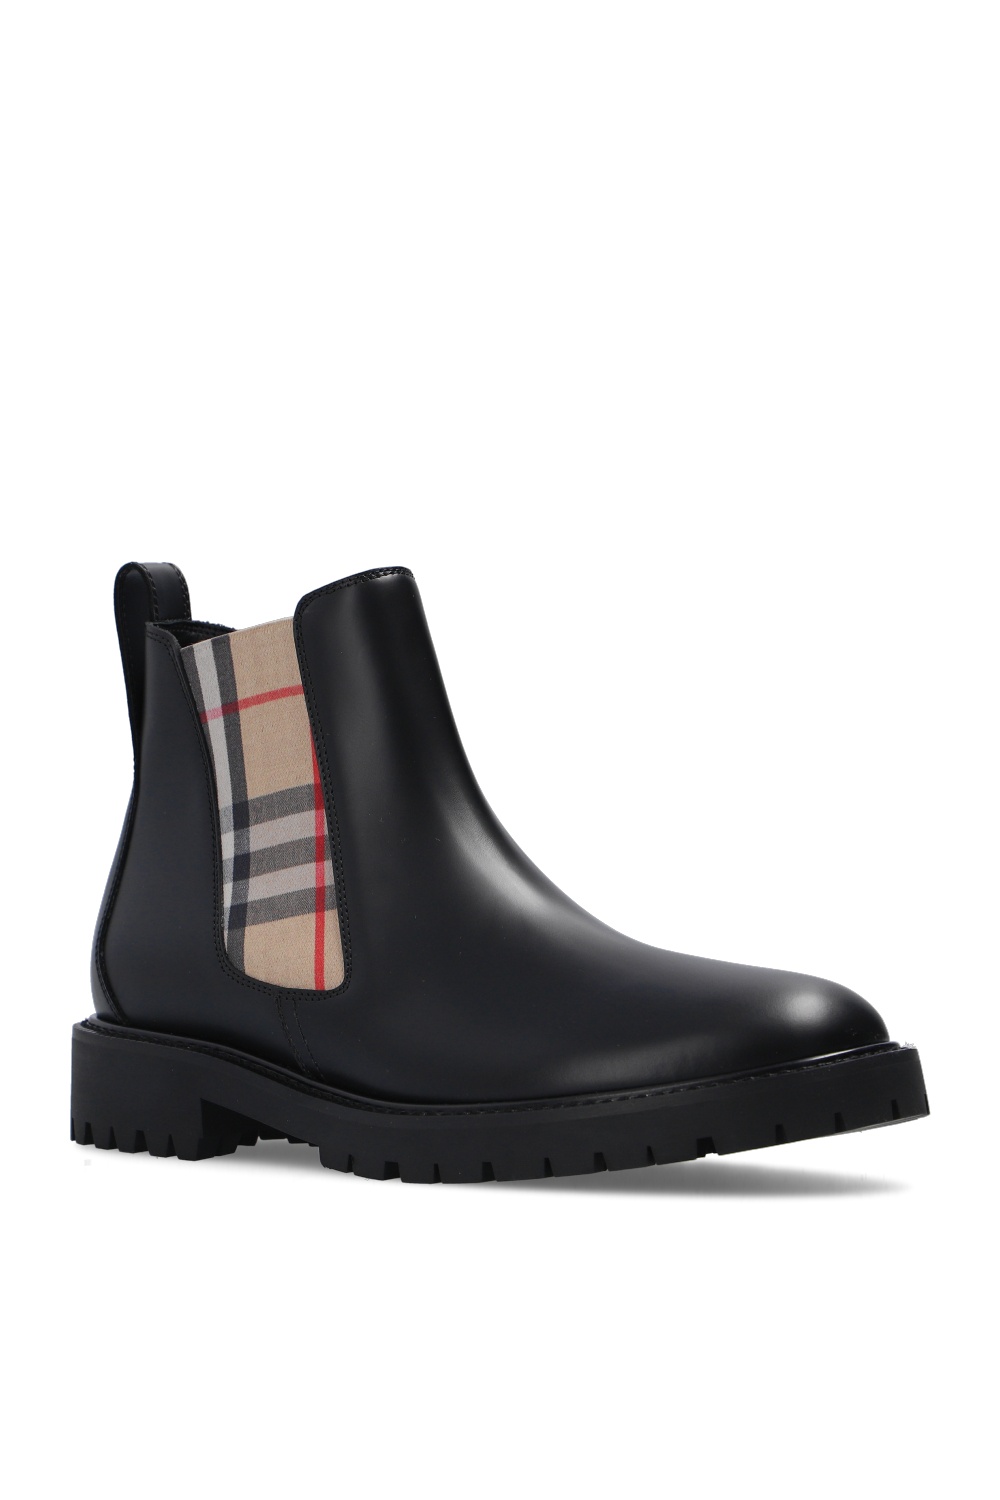 burberry touch for men boots